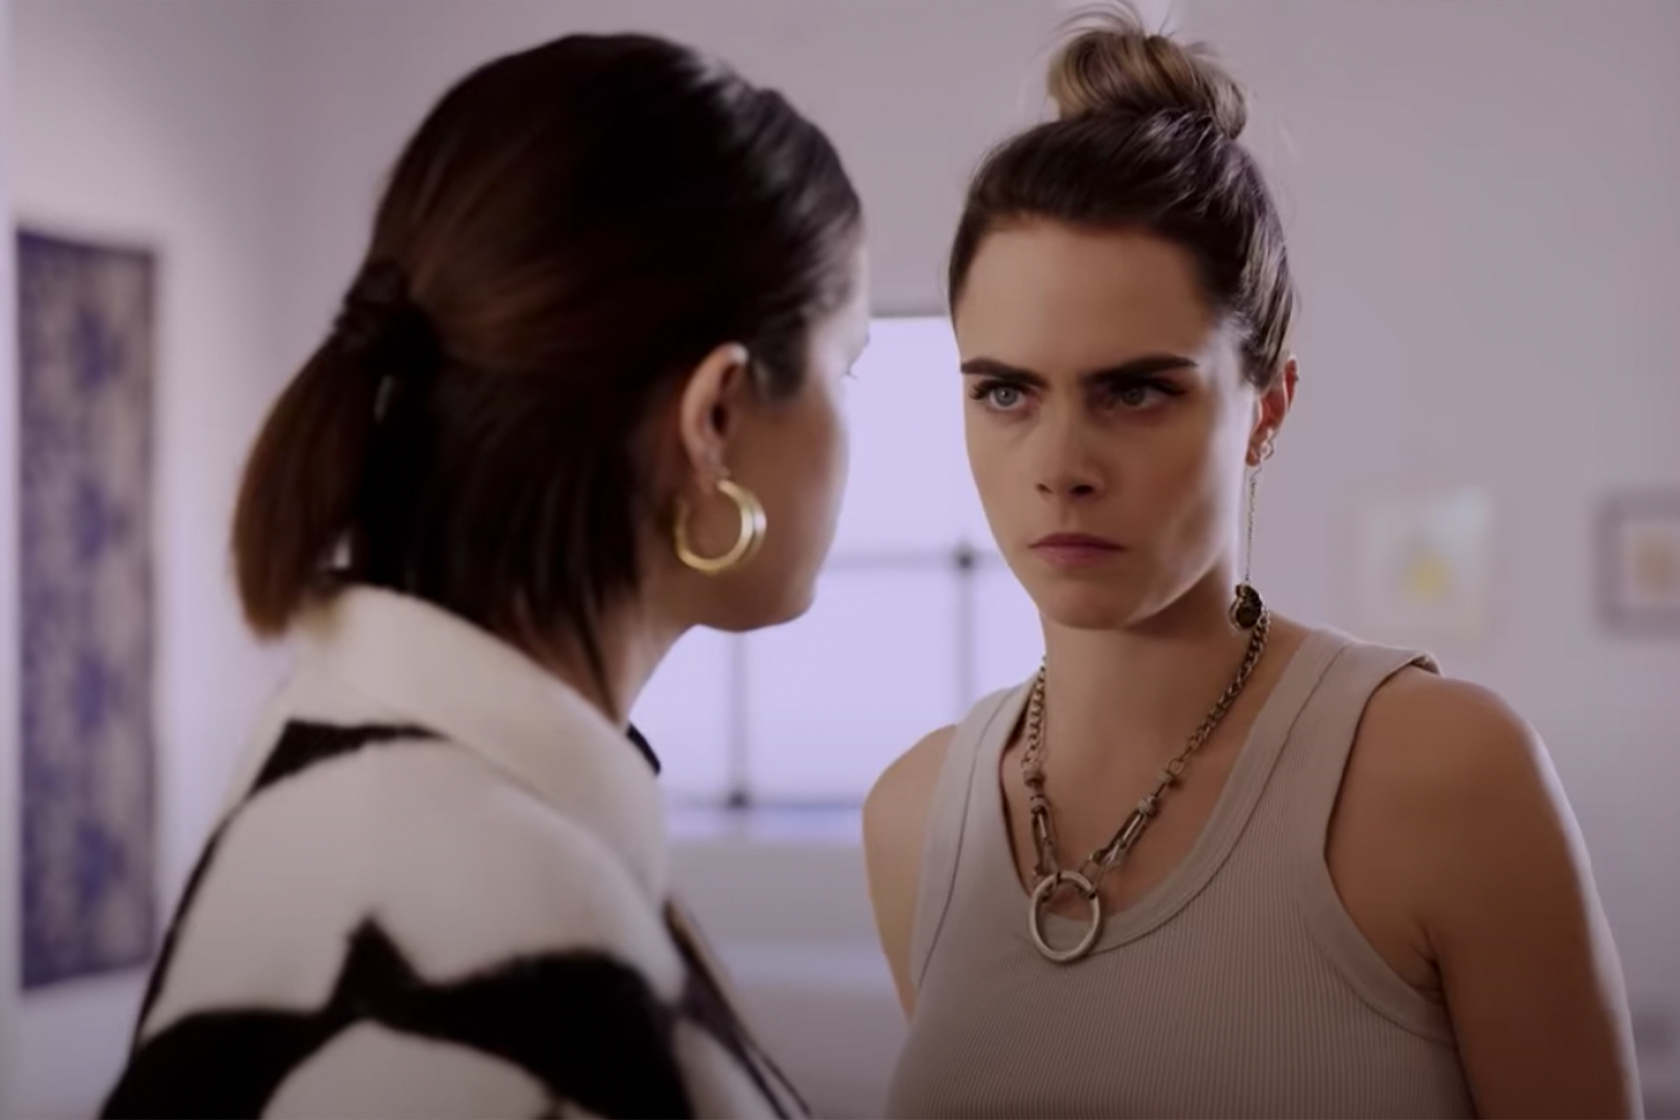 Cara Delevingne is headed for 'Only Murders in the Building' season 2 as Selena Gomez’s love interest - SF Gate